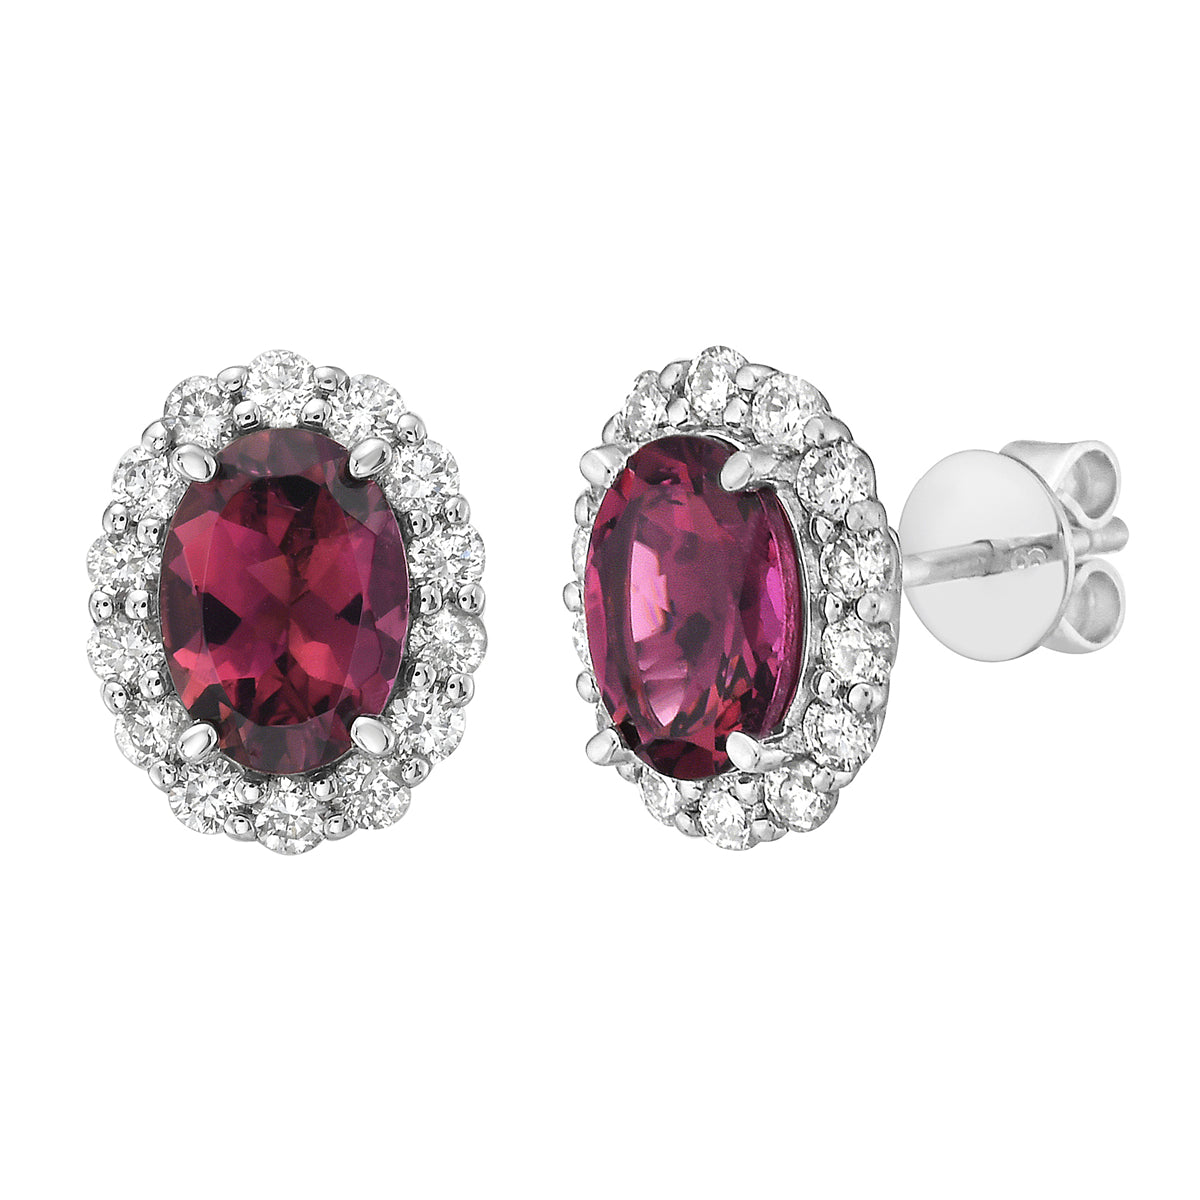 Earrings 14KW/2.0G 2PT-2.23CT 28RD-0.61CT Pink Tourmaline